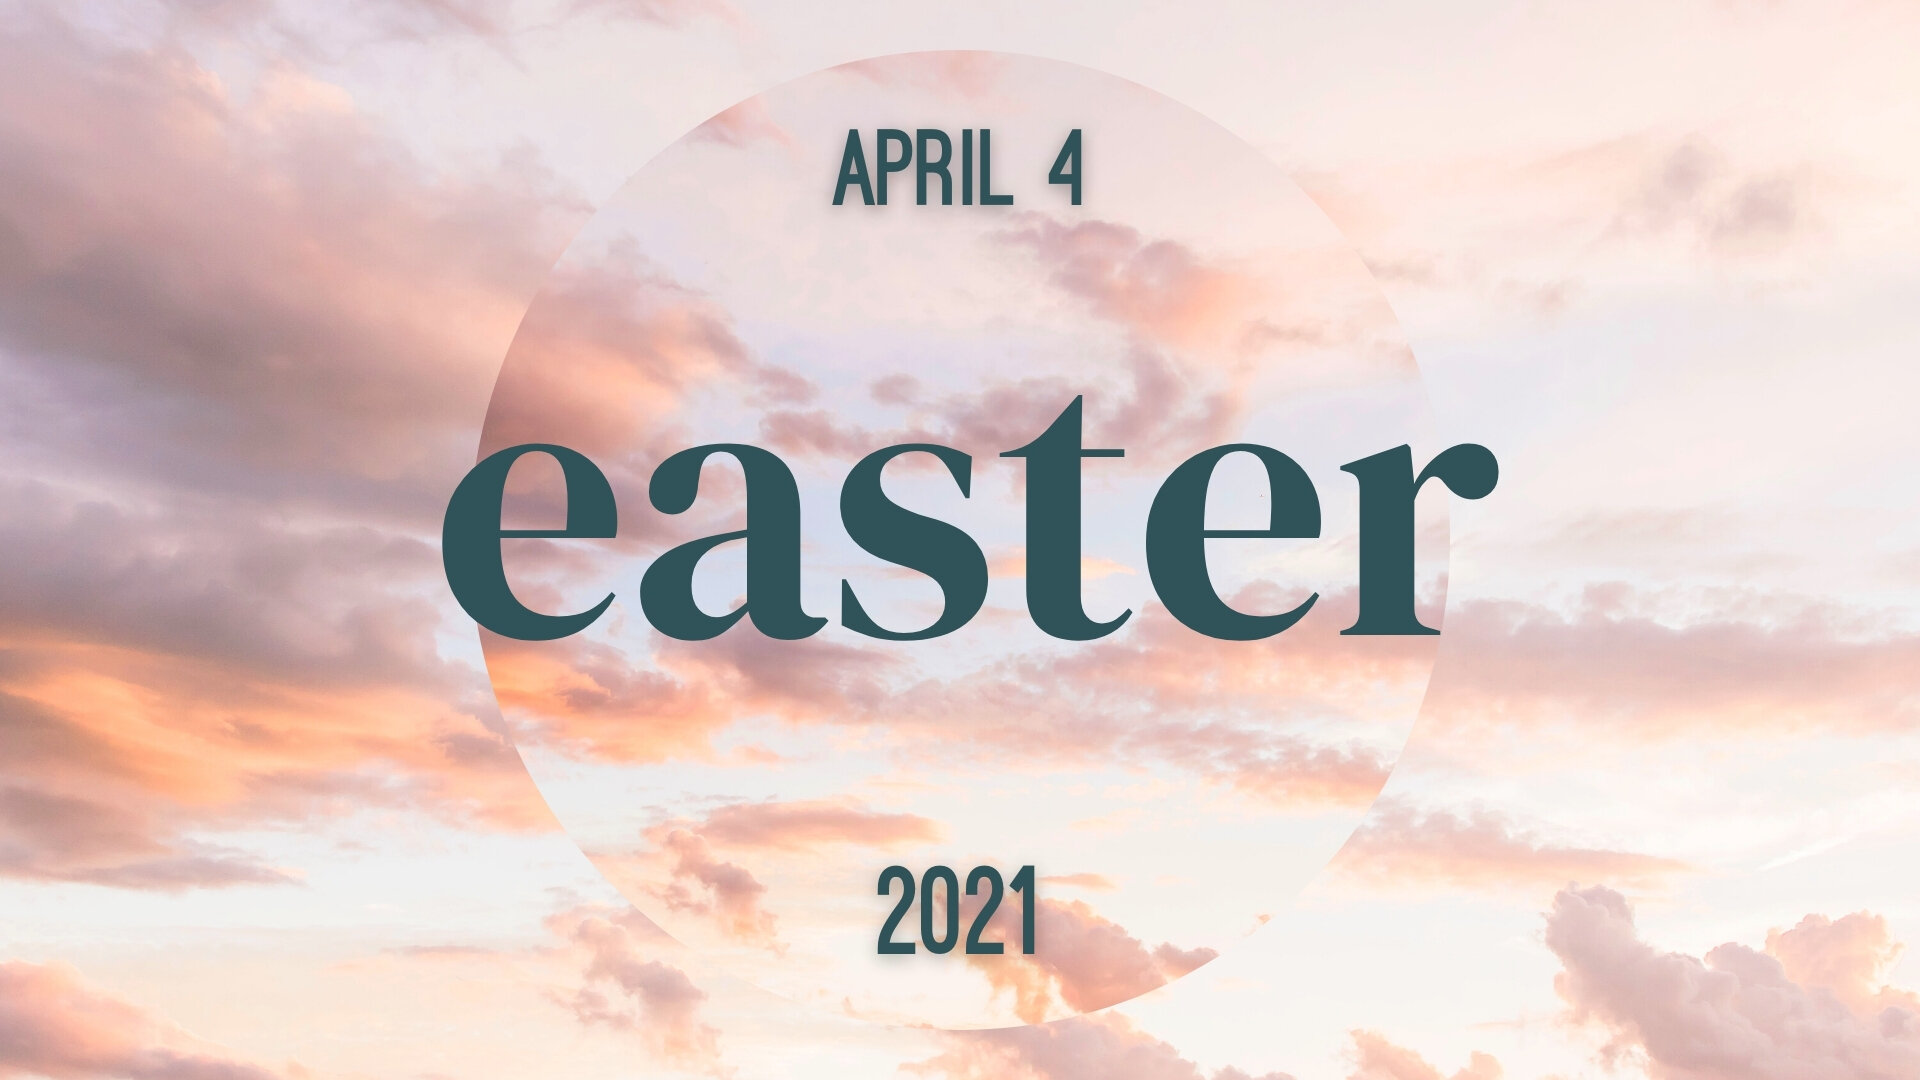 Message Series: Easter 2021